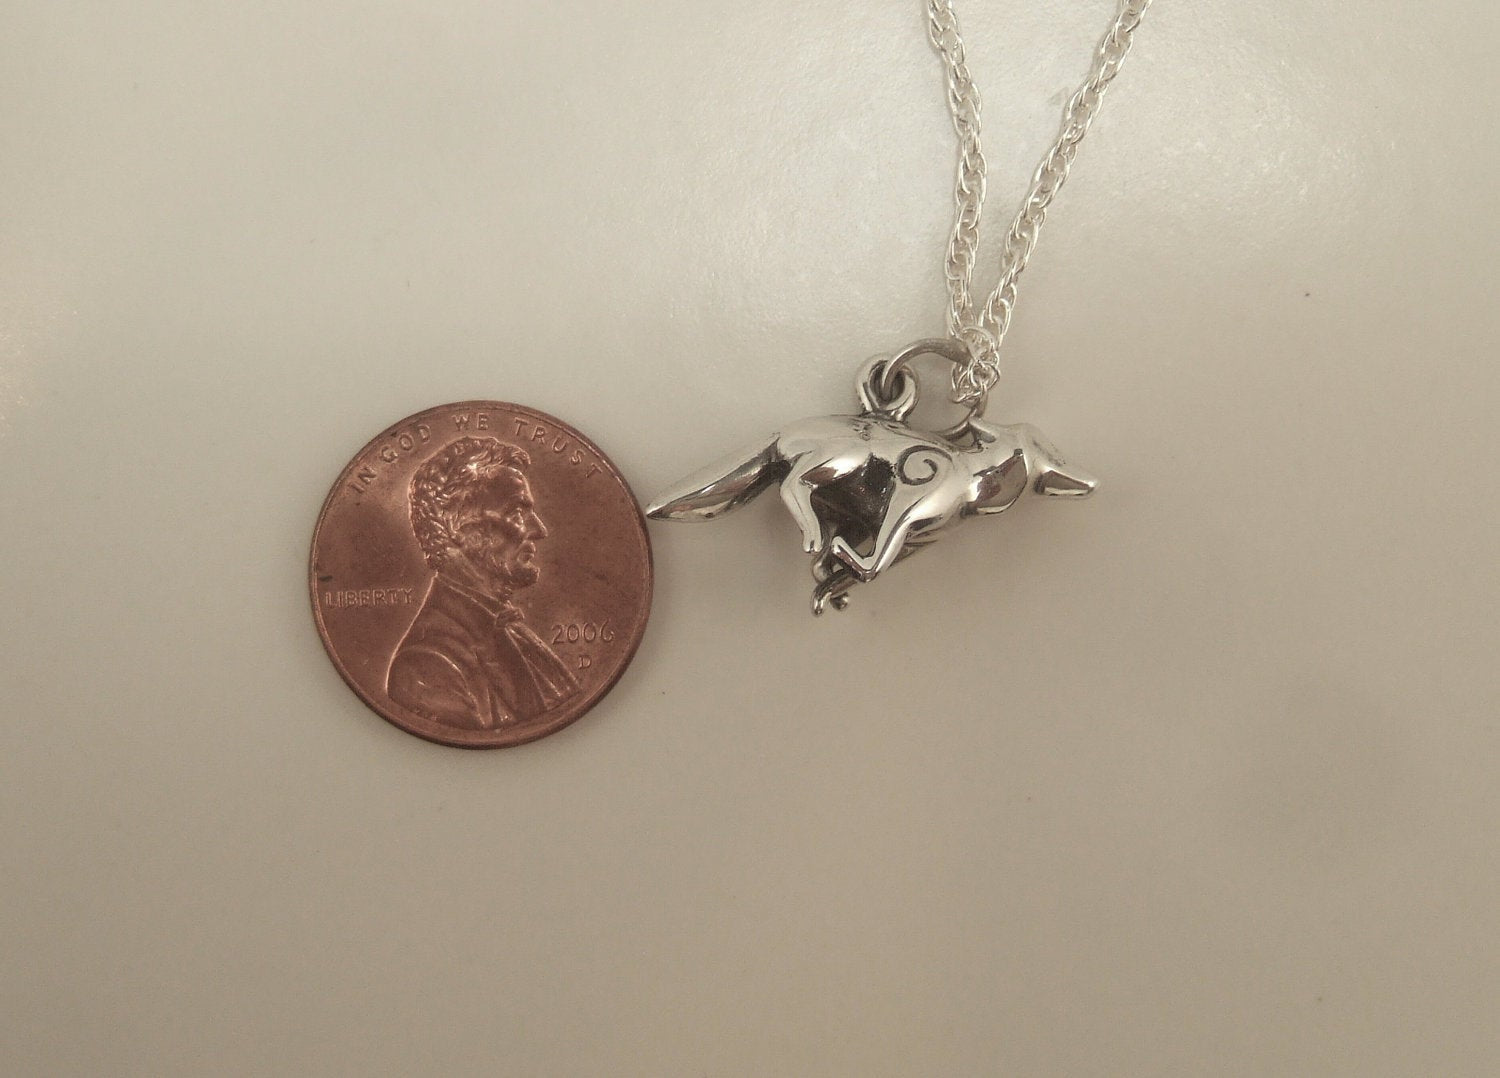 silver coyote pendant with chain